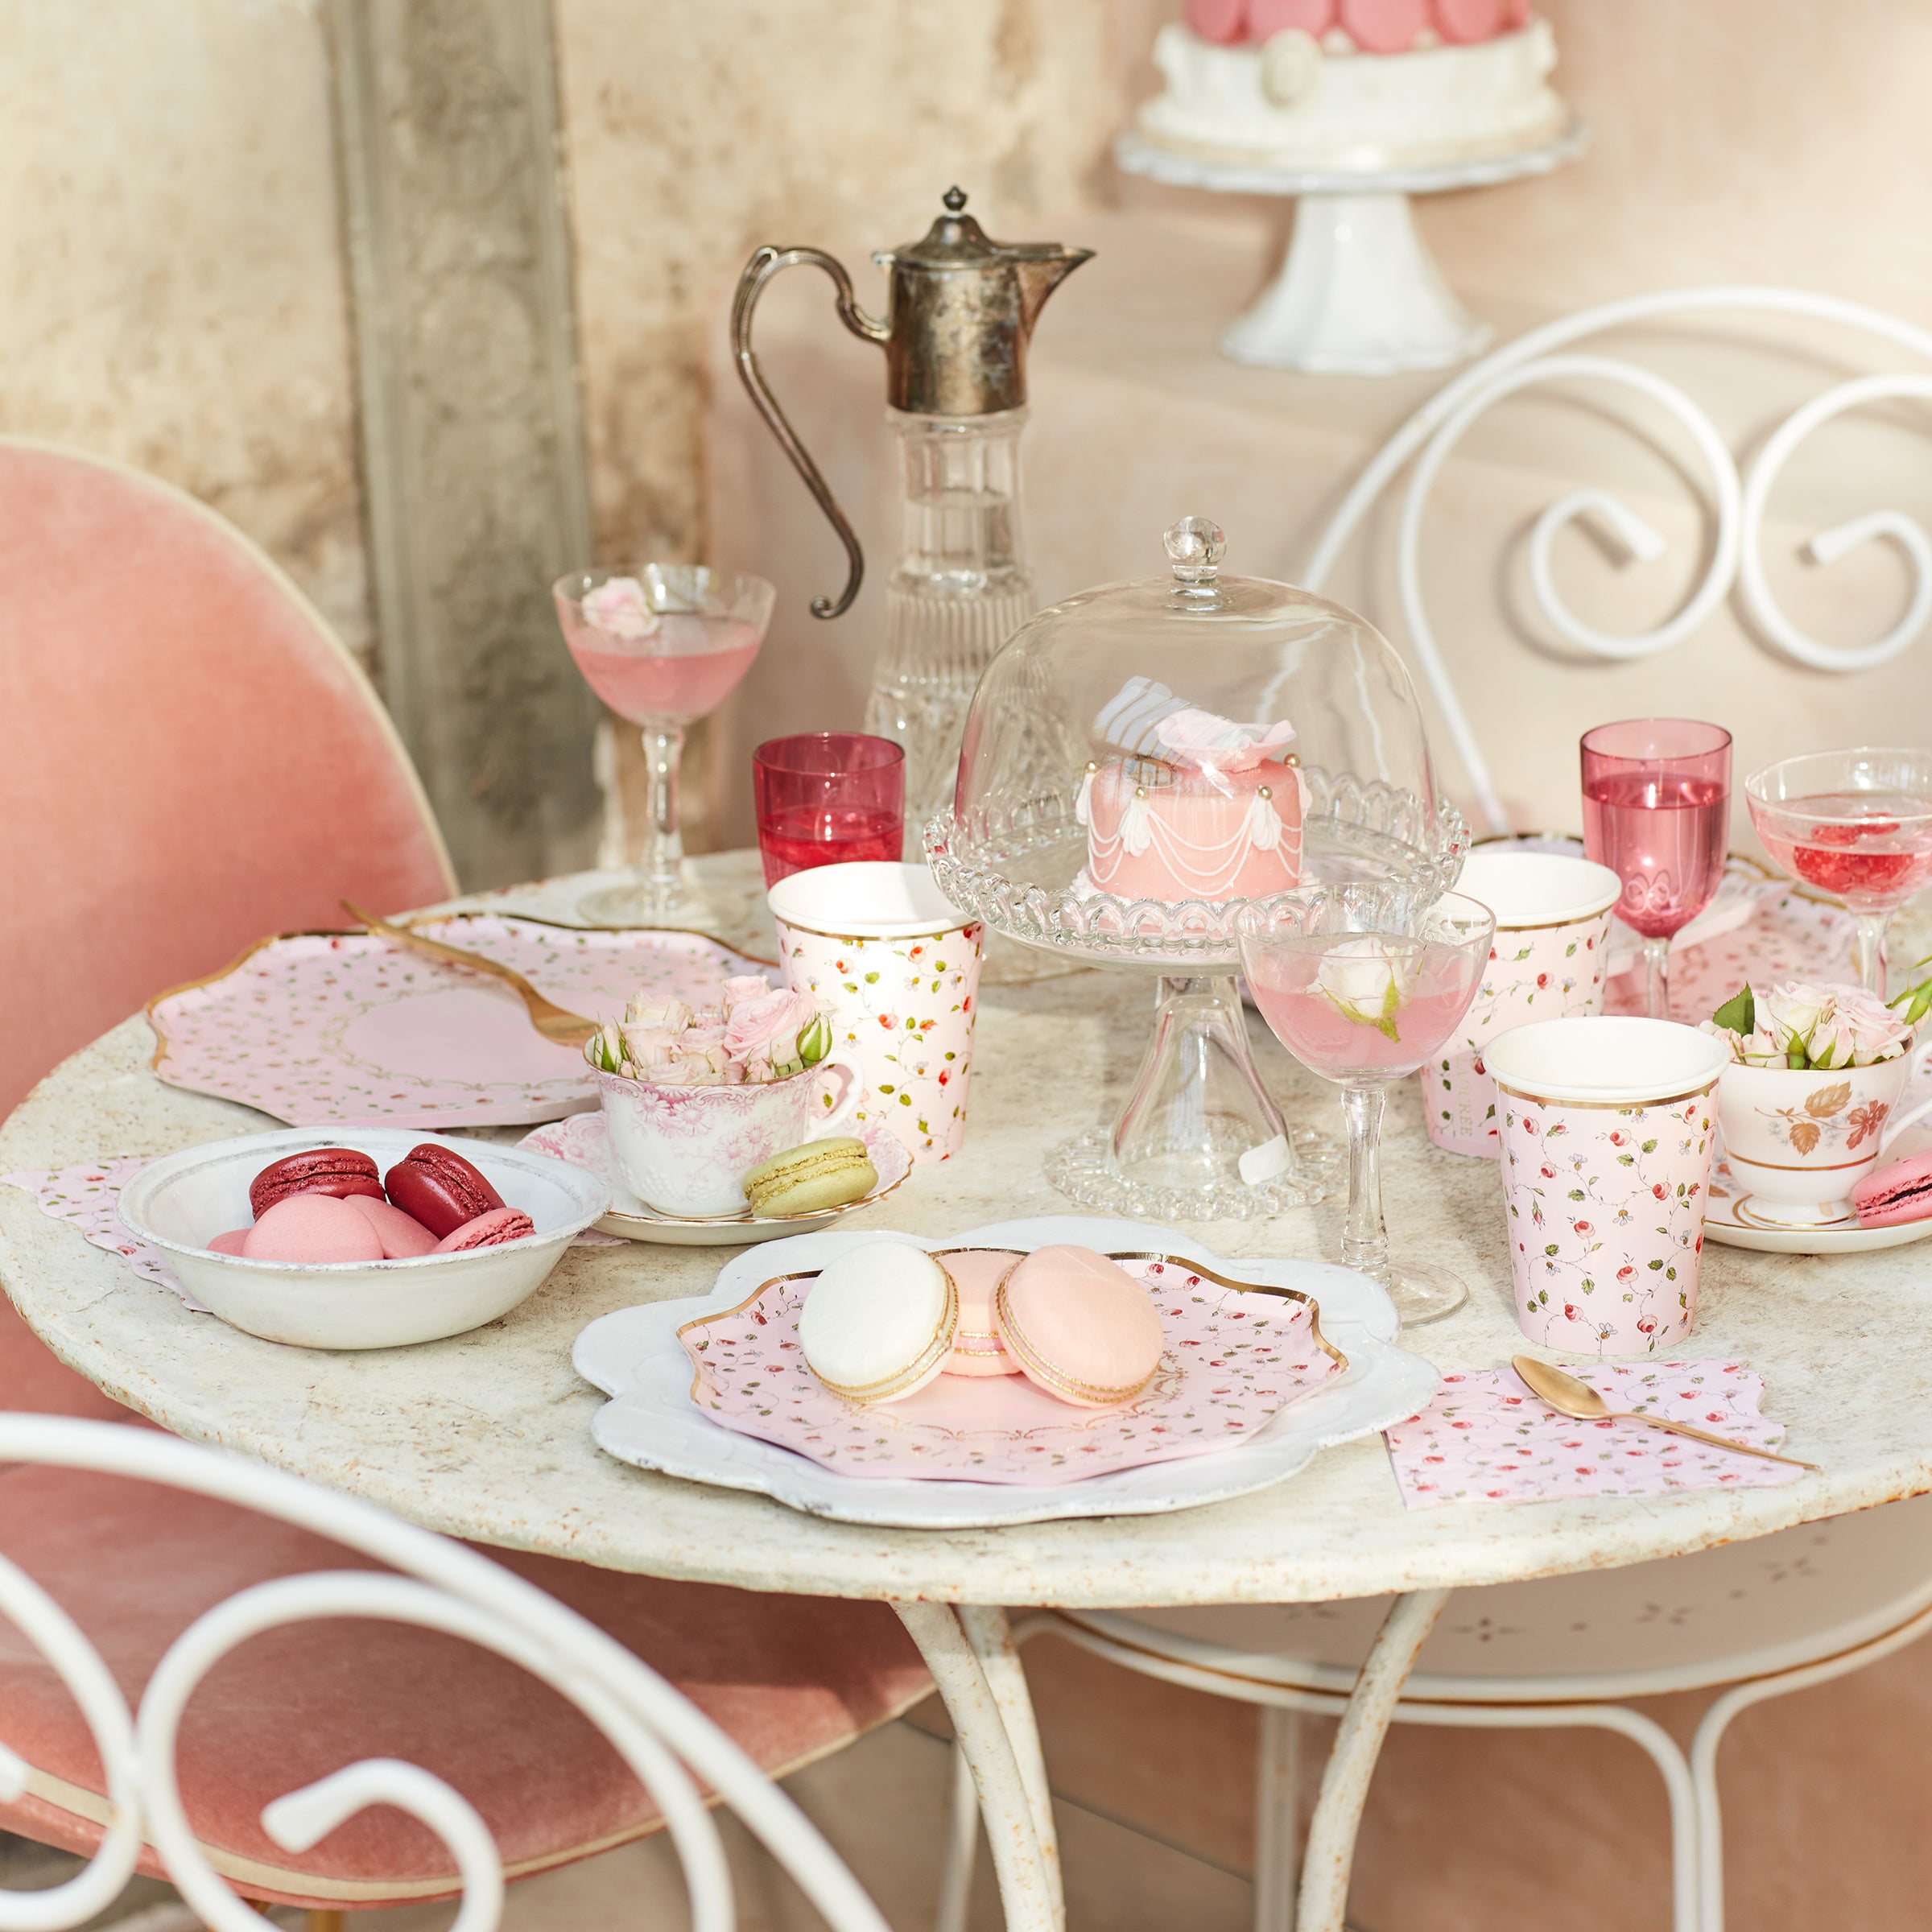 Our party plates, with soft pink and red, are perfect for a romantic dinner.